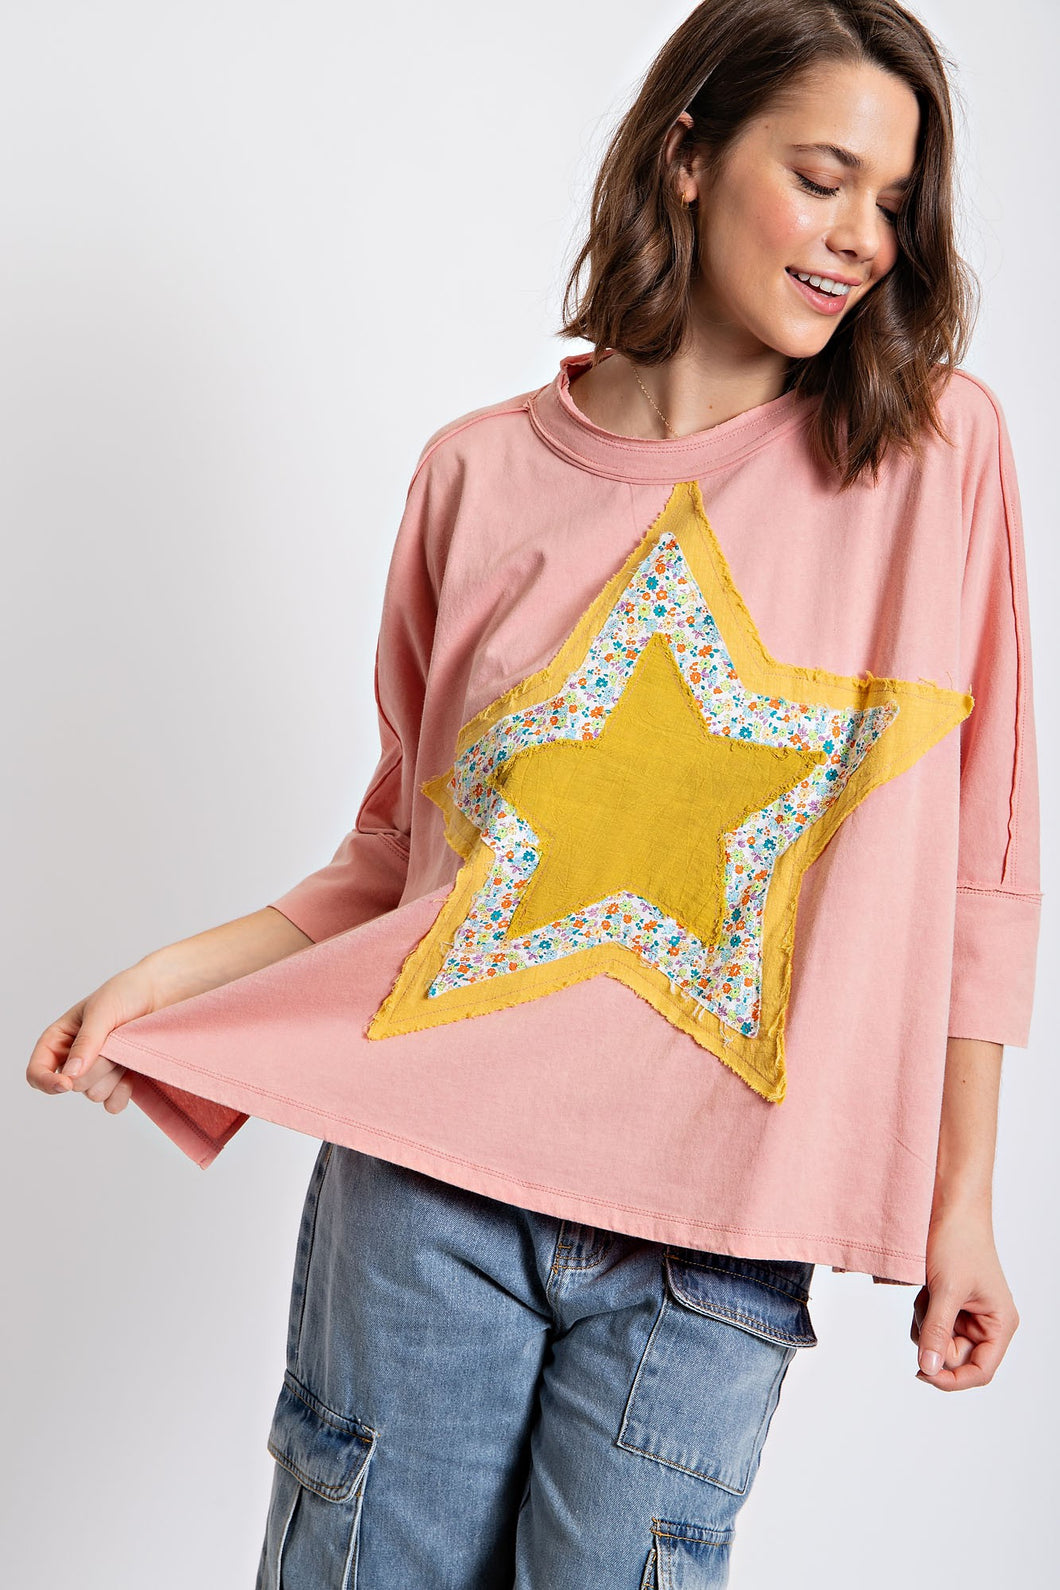 Easel Mineral Washed Star Patched Top in Peach Coral Shirts & Tops Easel   